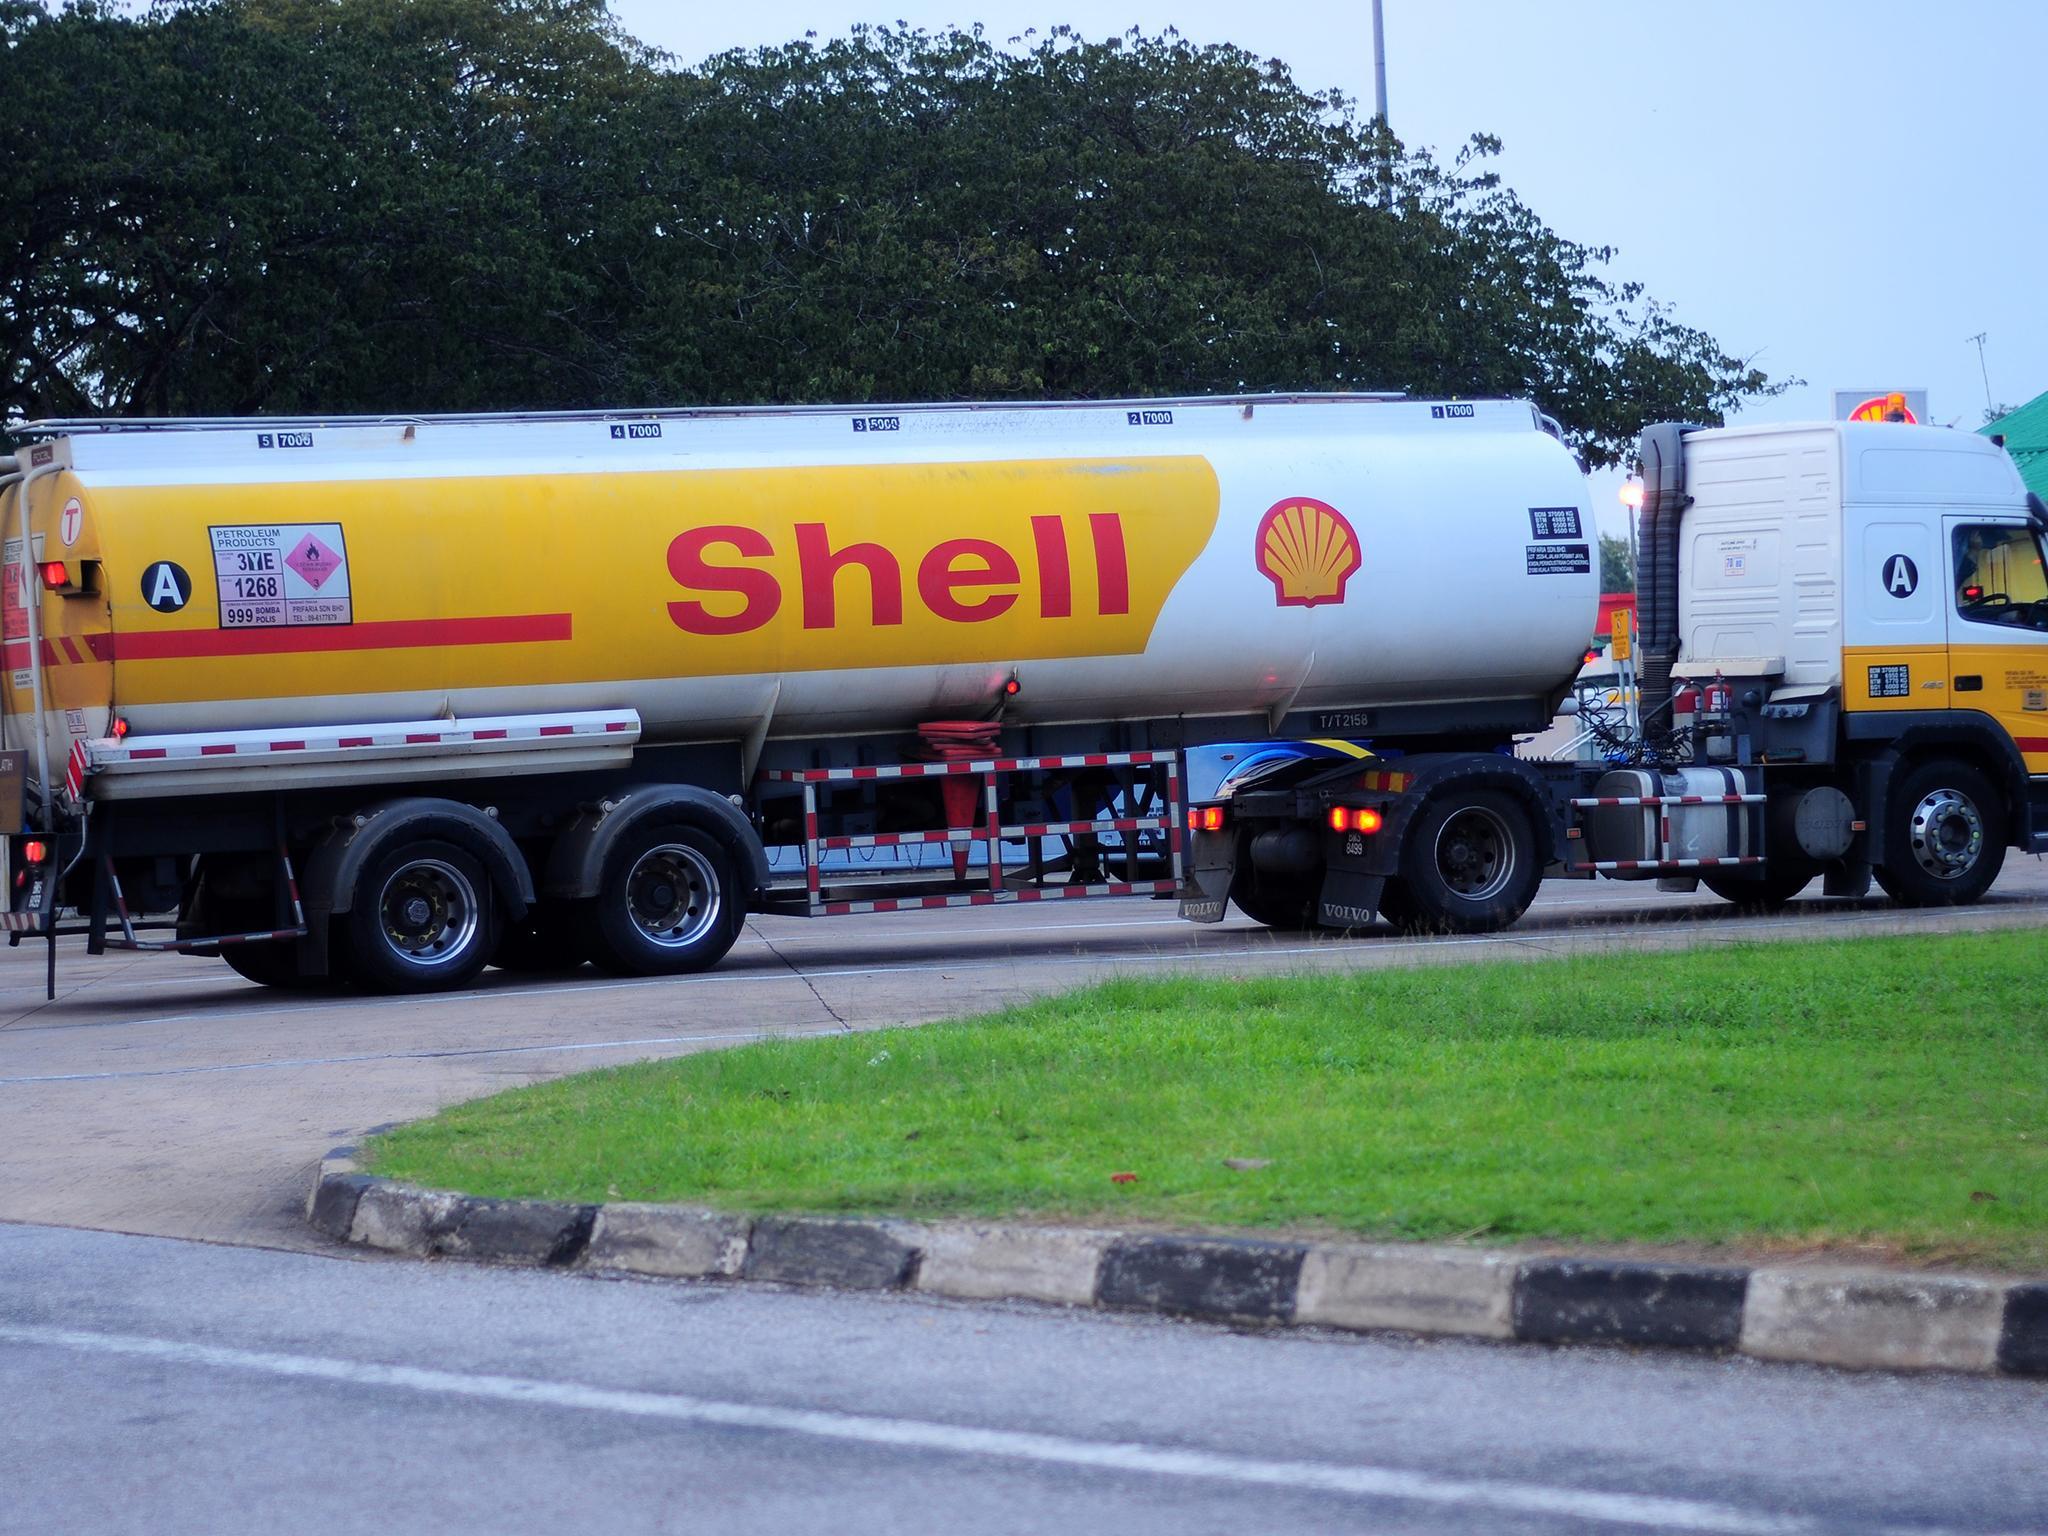 Going green? Shell is switching nearly a million customers to renewables